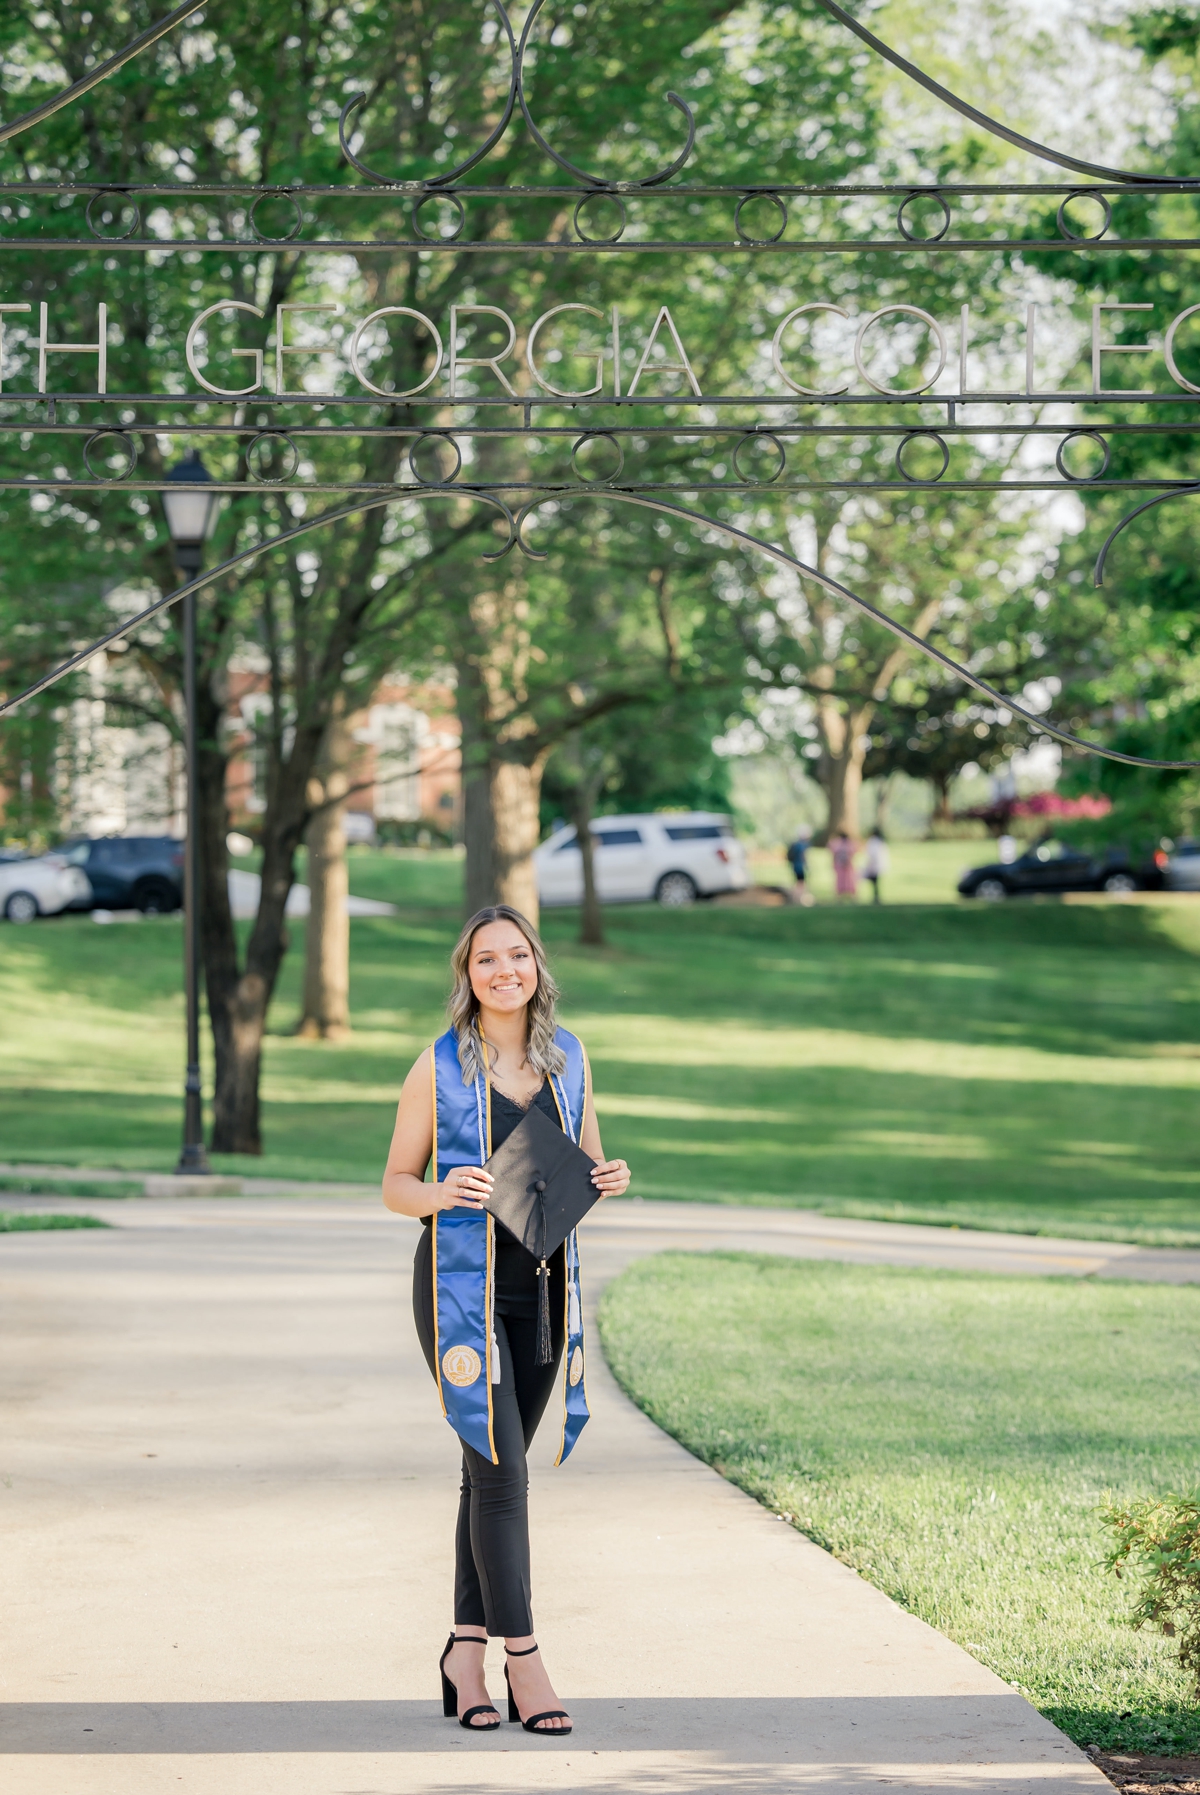 A University of North Georgia graduate walking across campus during her graduation session.